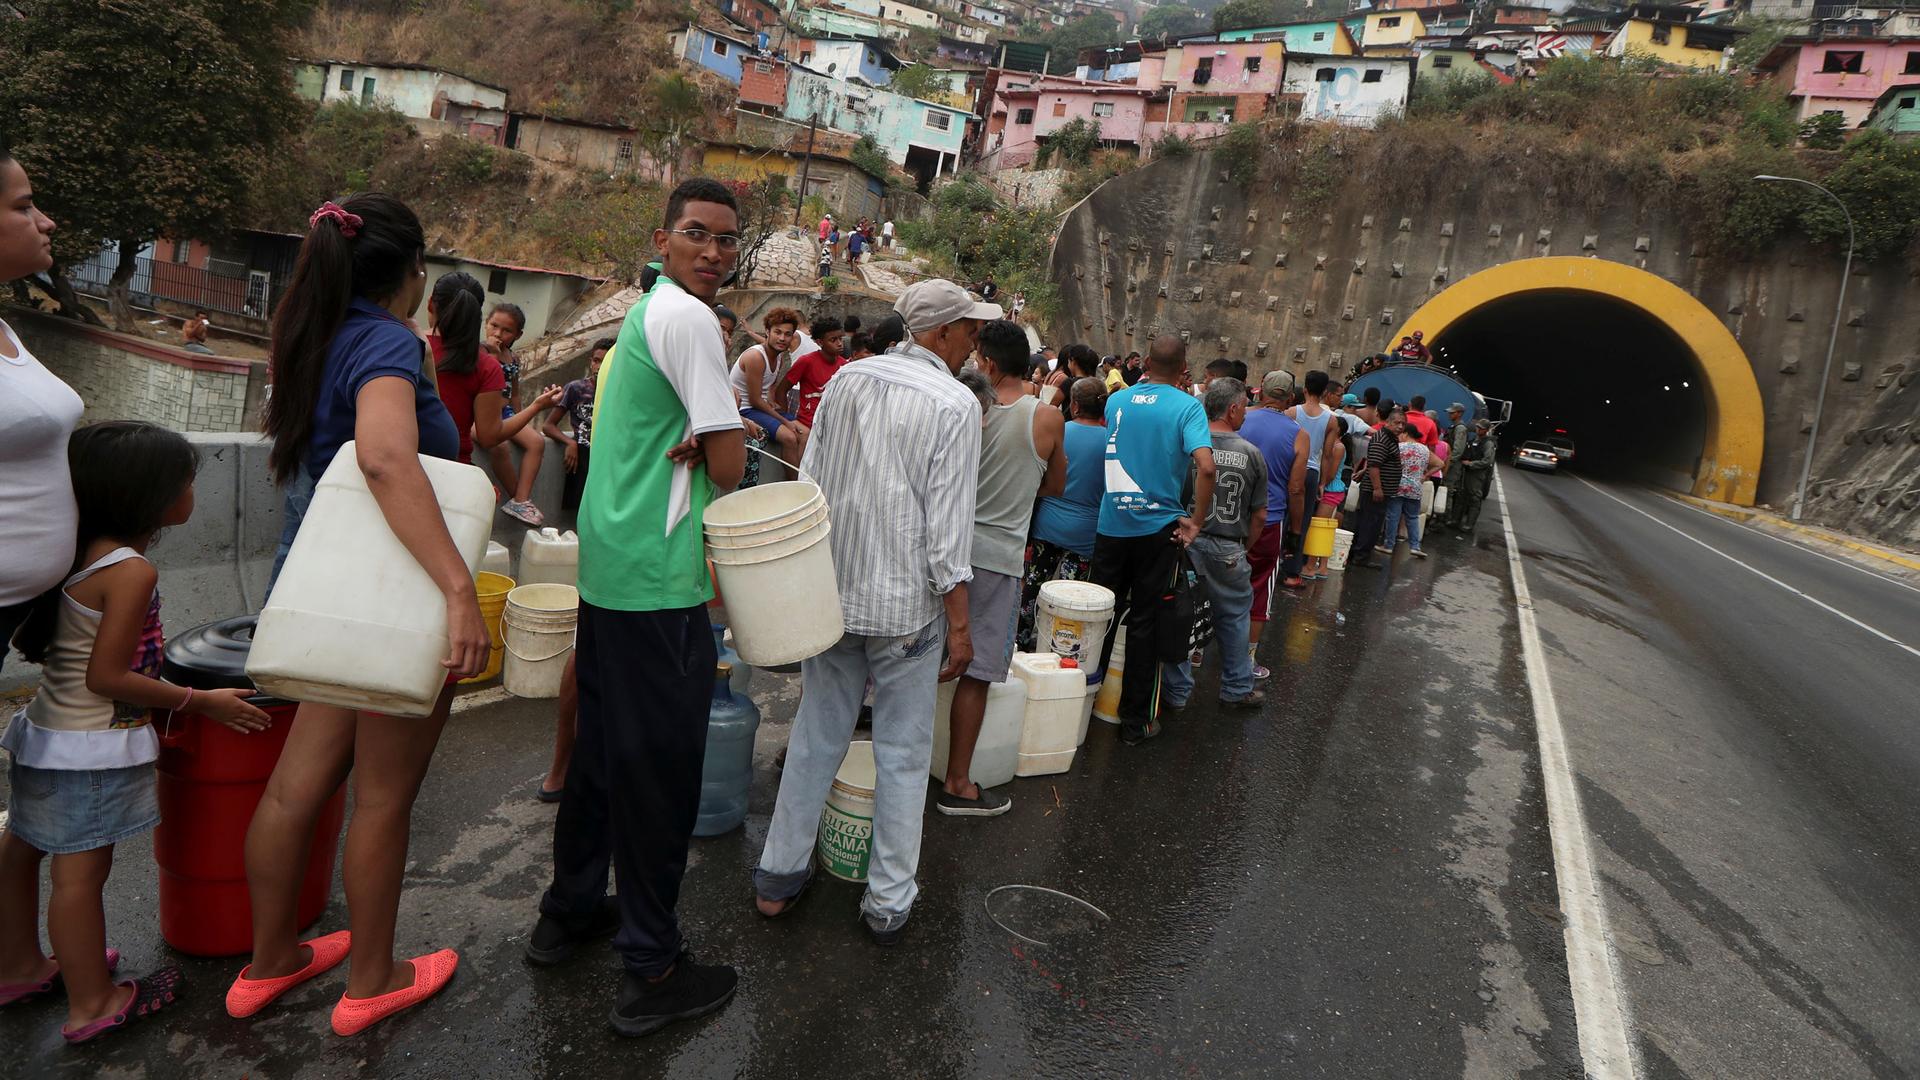 Dozens of people are shown standing in linewith buckets and other containers to collect water in Caracas.